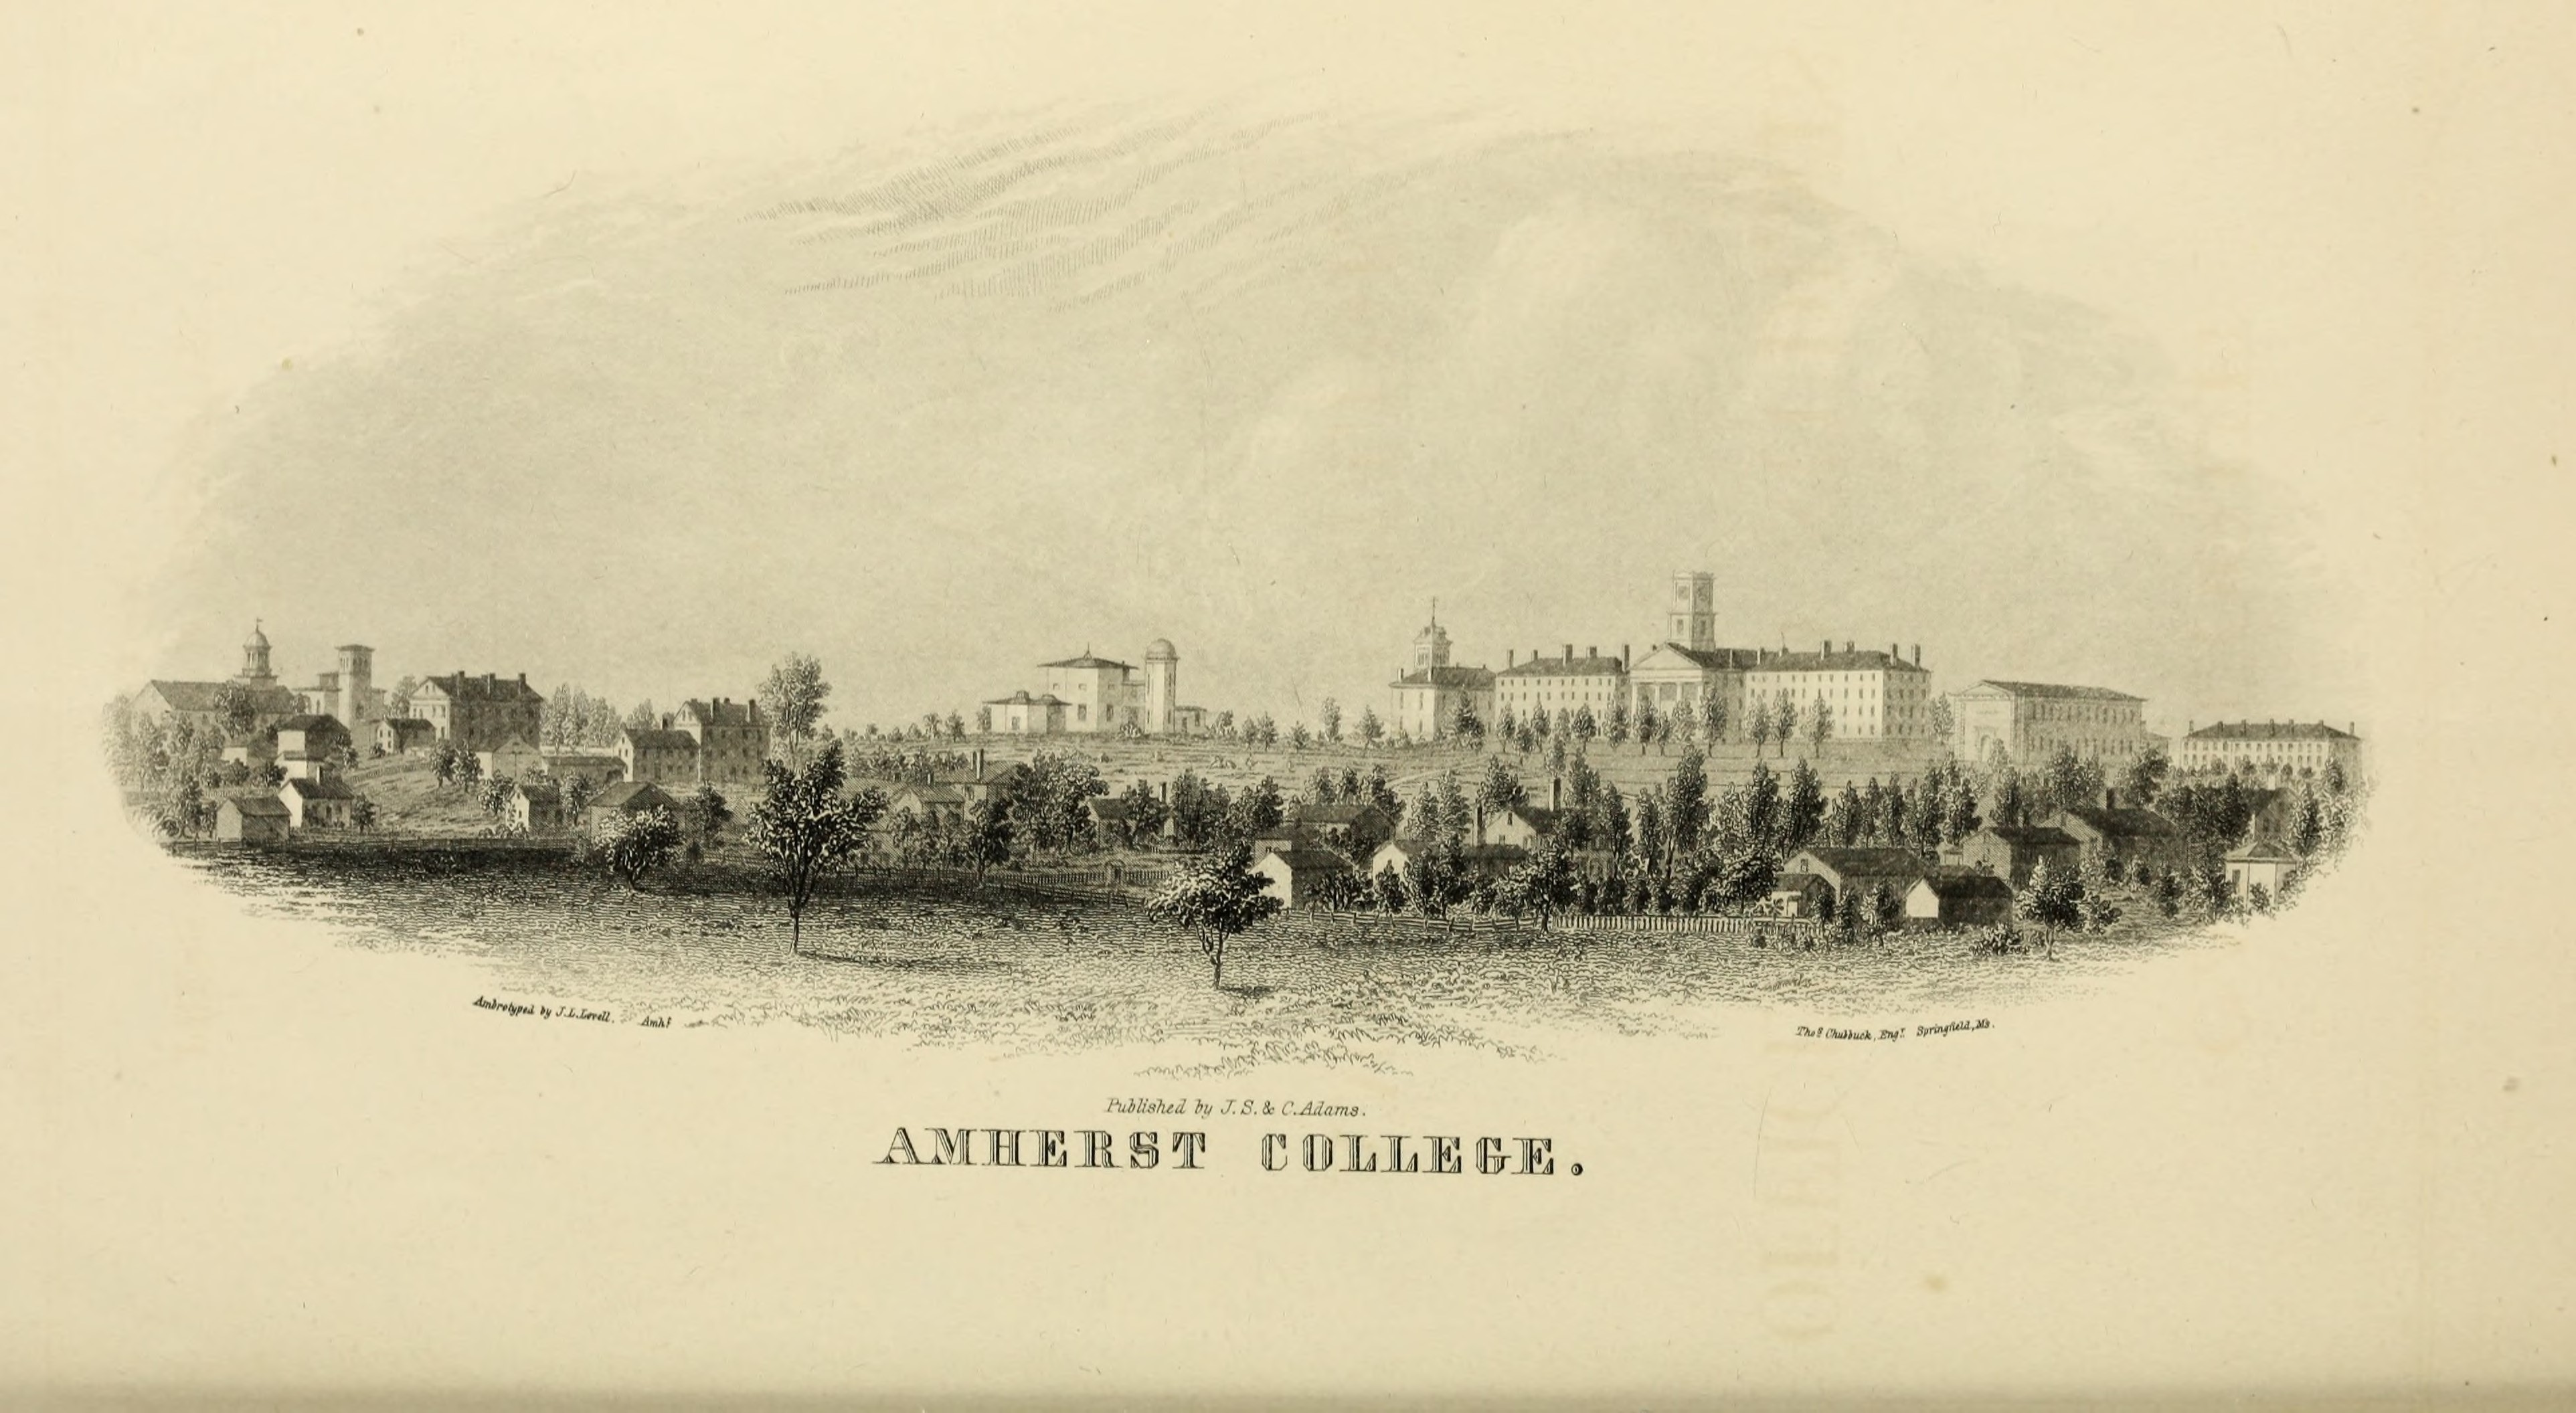 View of Amherst College